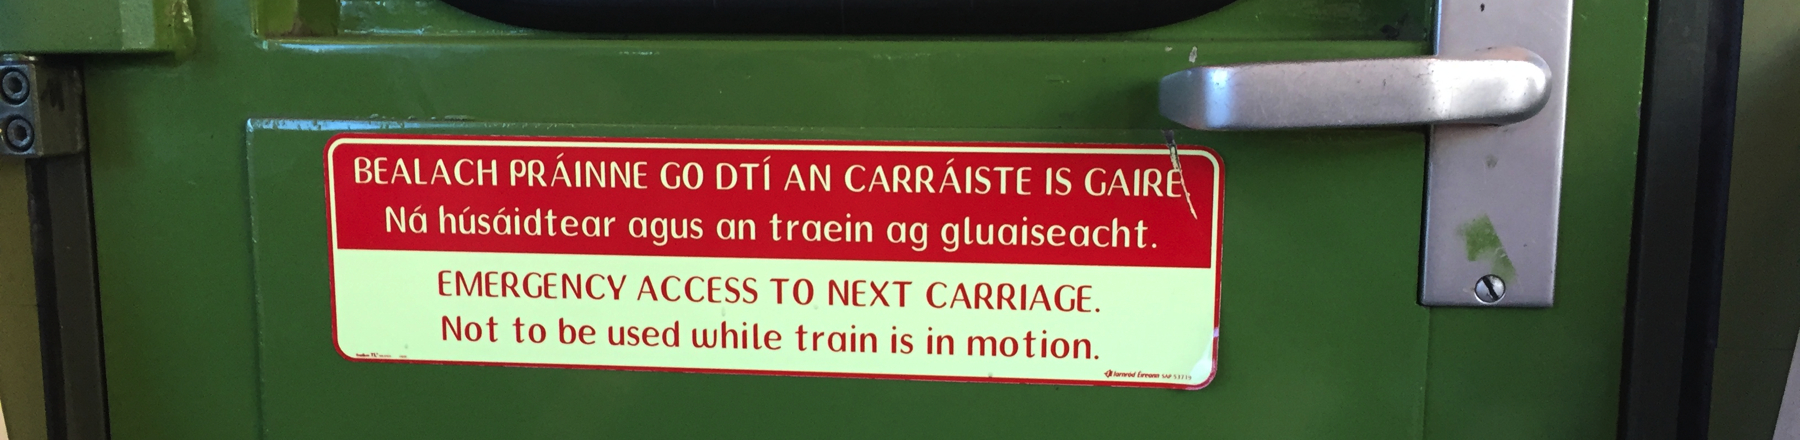 Access to next carriage